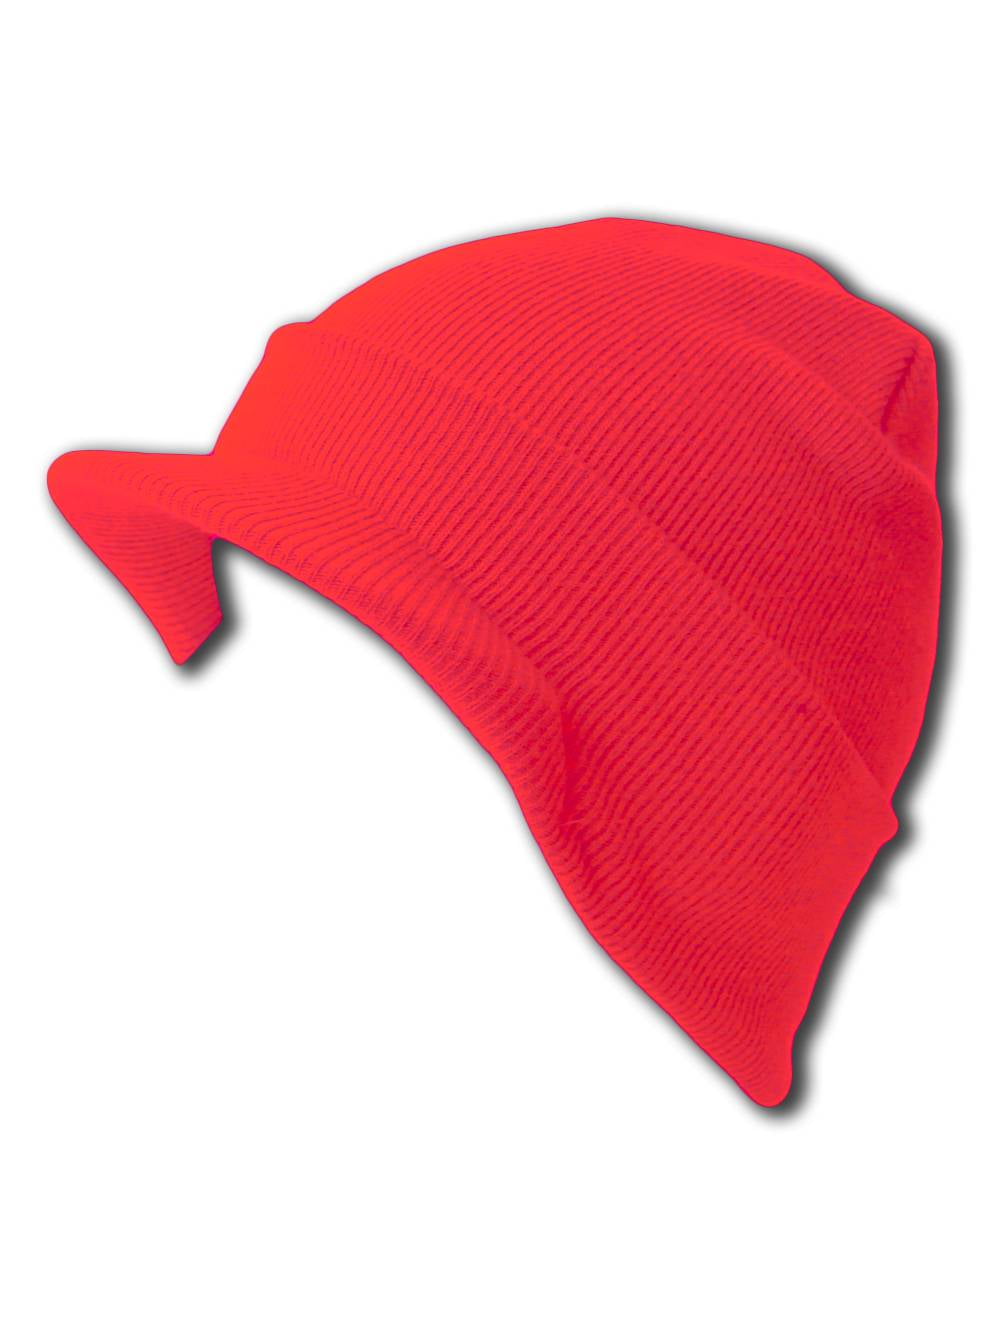 Solid Red Hat Structured Curved Brim Cap Hat Beanie NEW! 